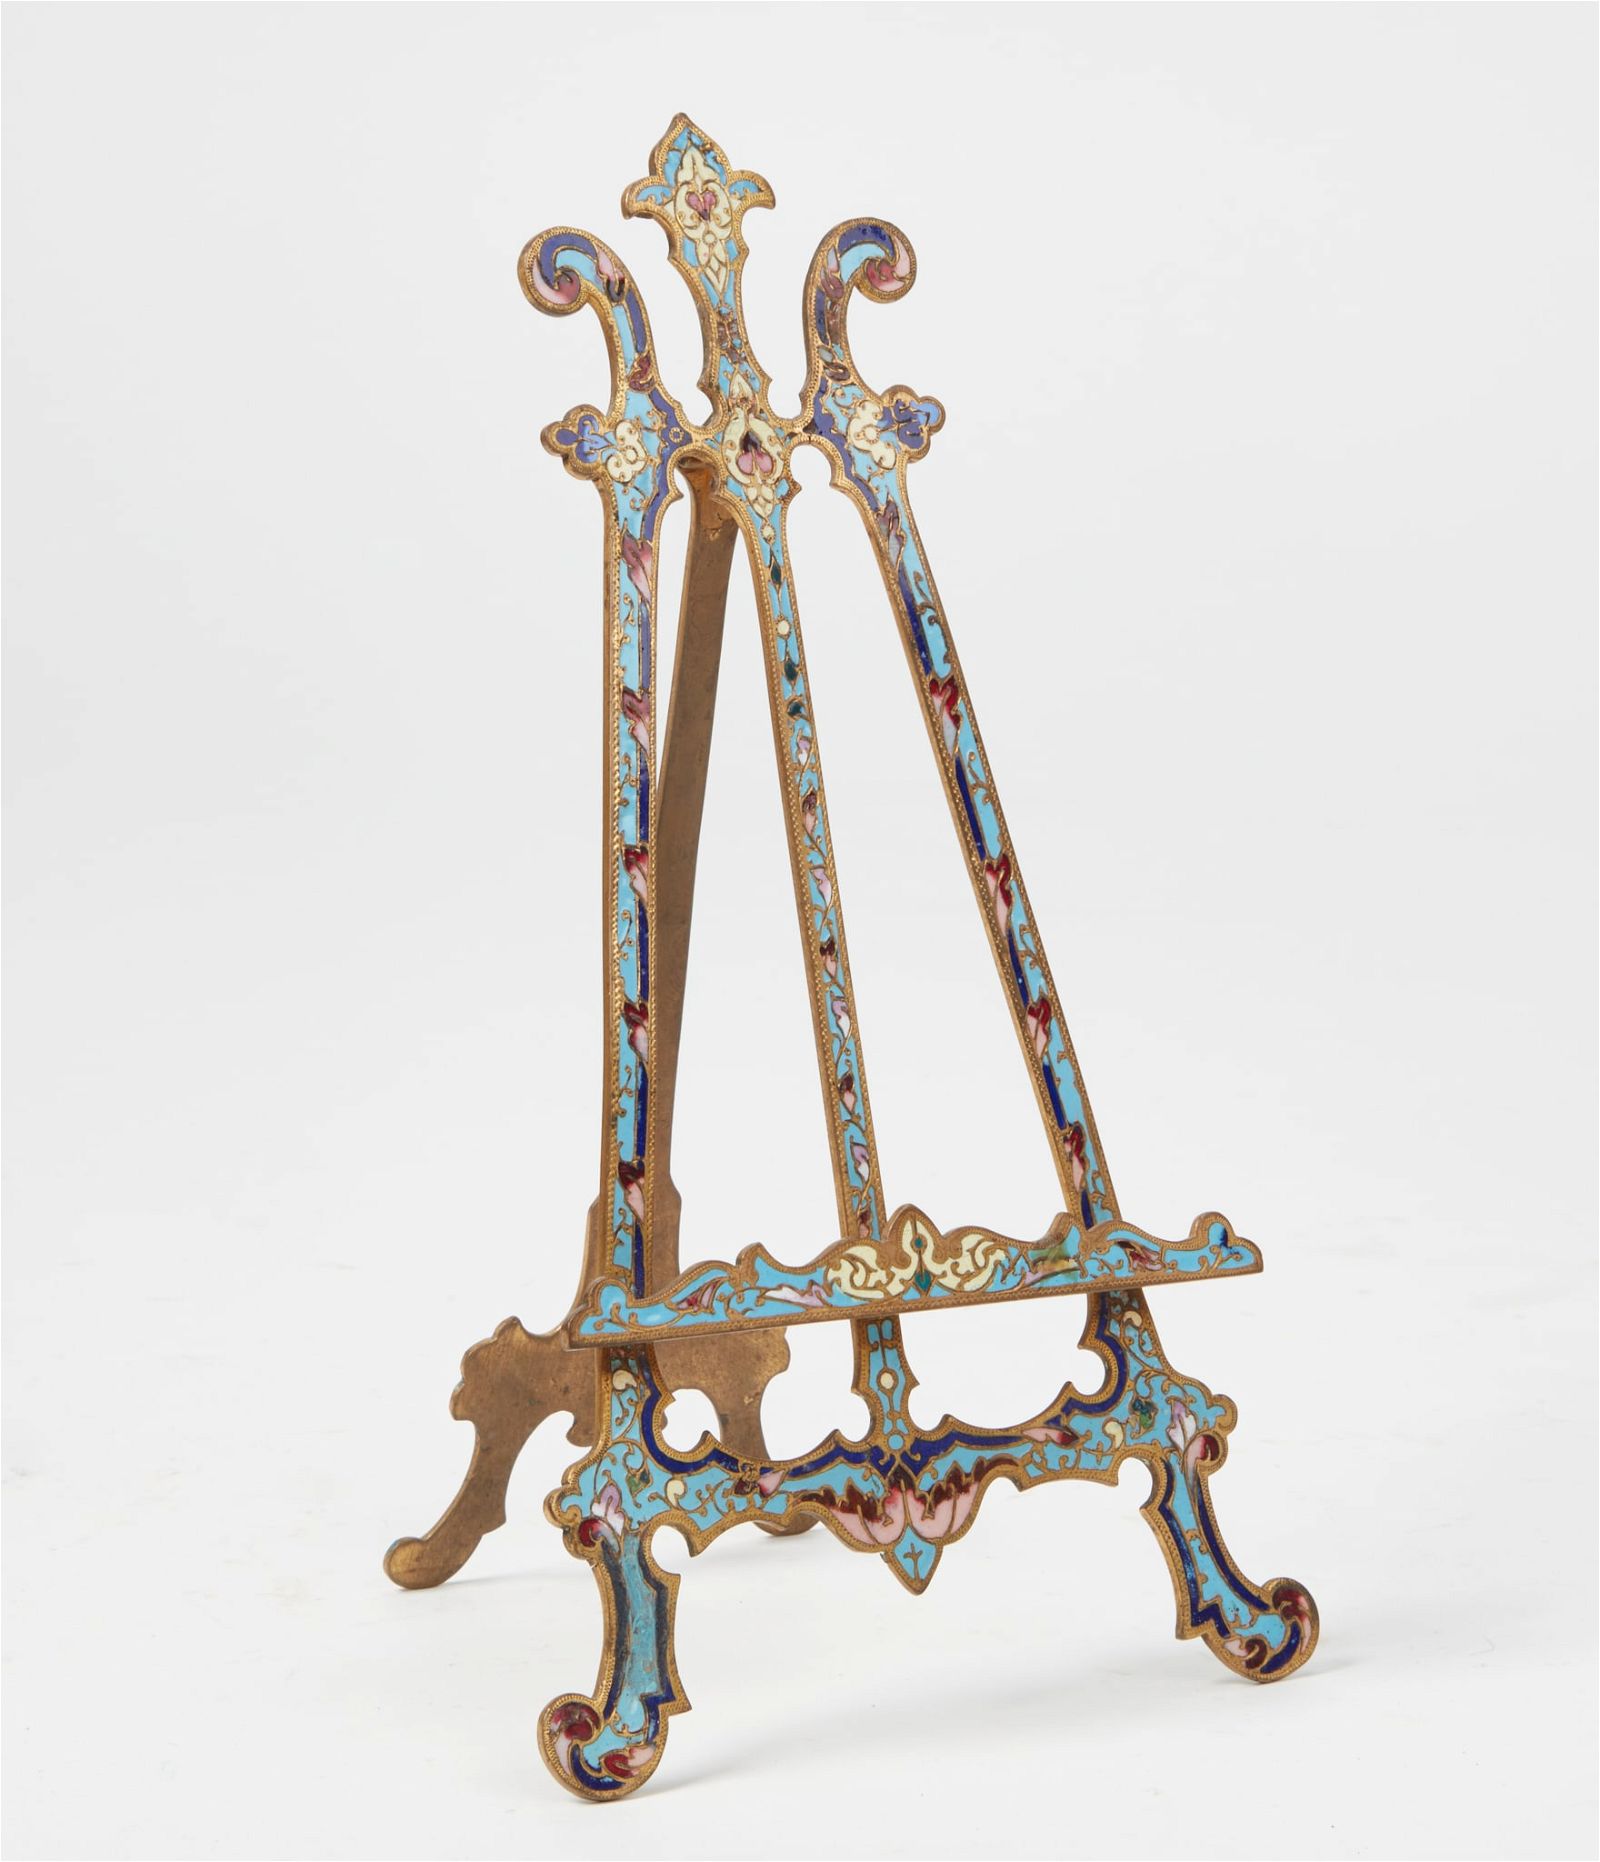 A FRENCH CHAMPLEVE ENAMEL BRONZE